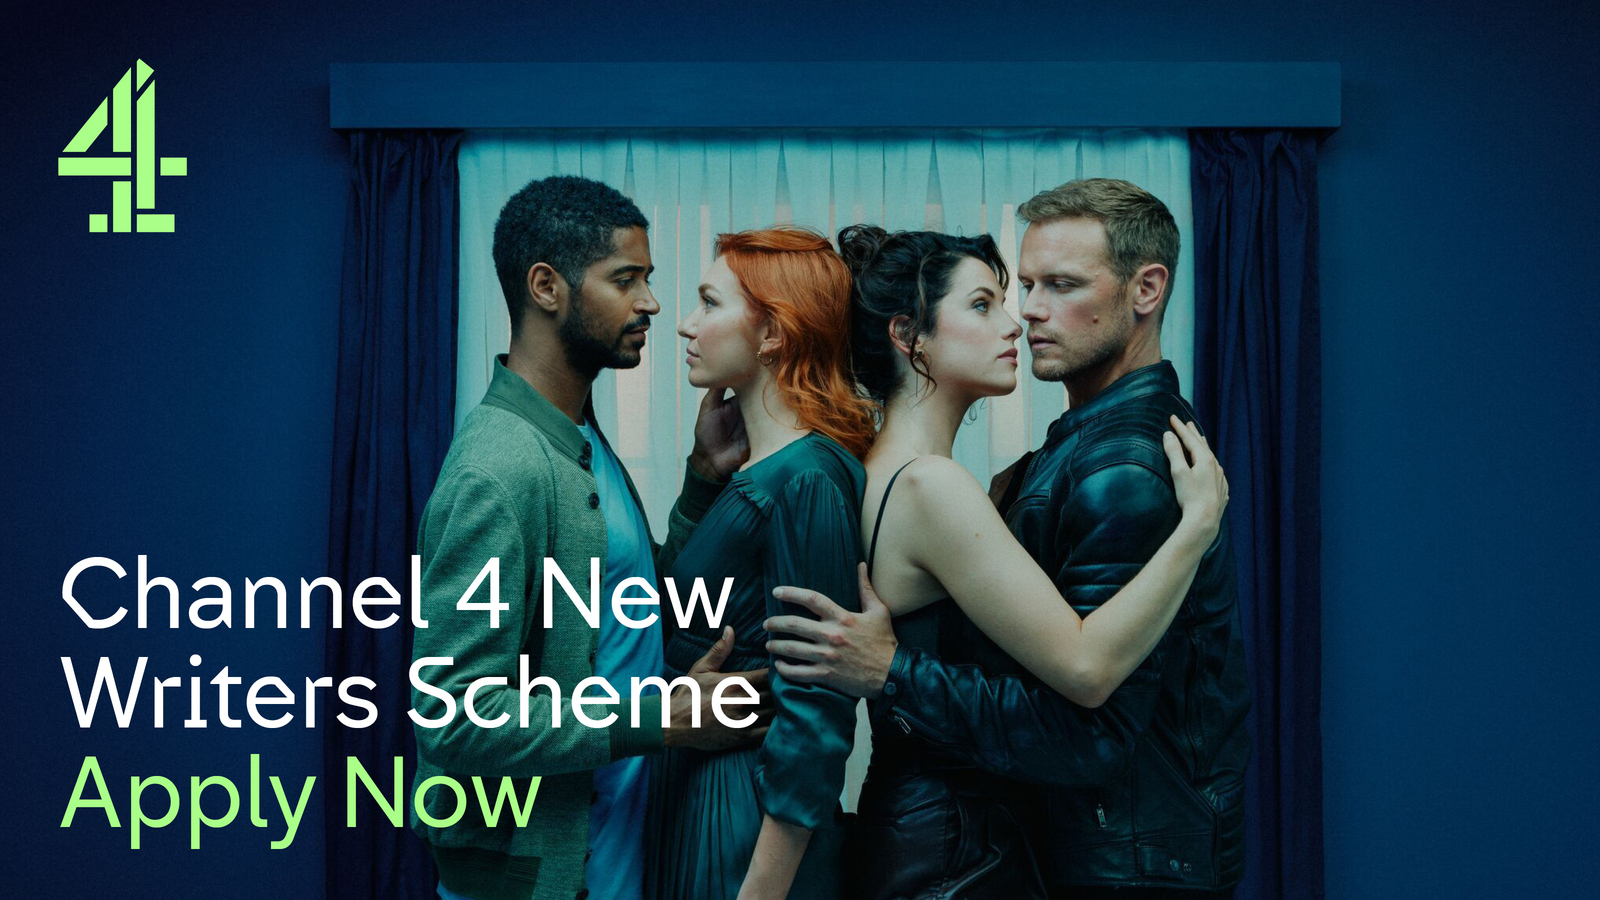 Graphic reads: Channel 4 New Writers Scheme - Apply Now. With a still from THE COUPLE NEXT DOOR showing Evie and Pete, and Danny and Becka embracing.